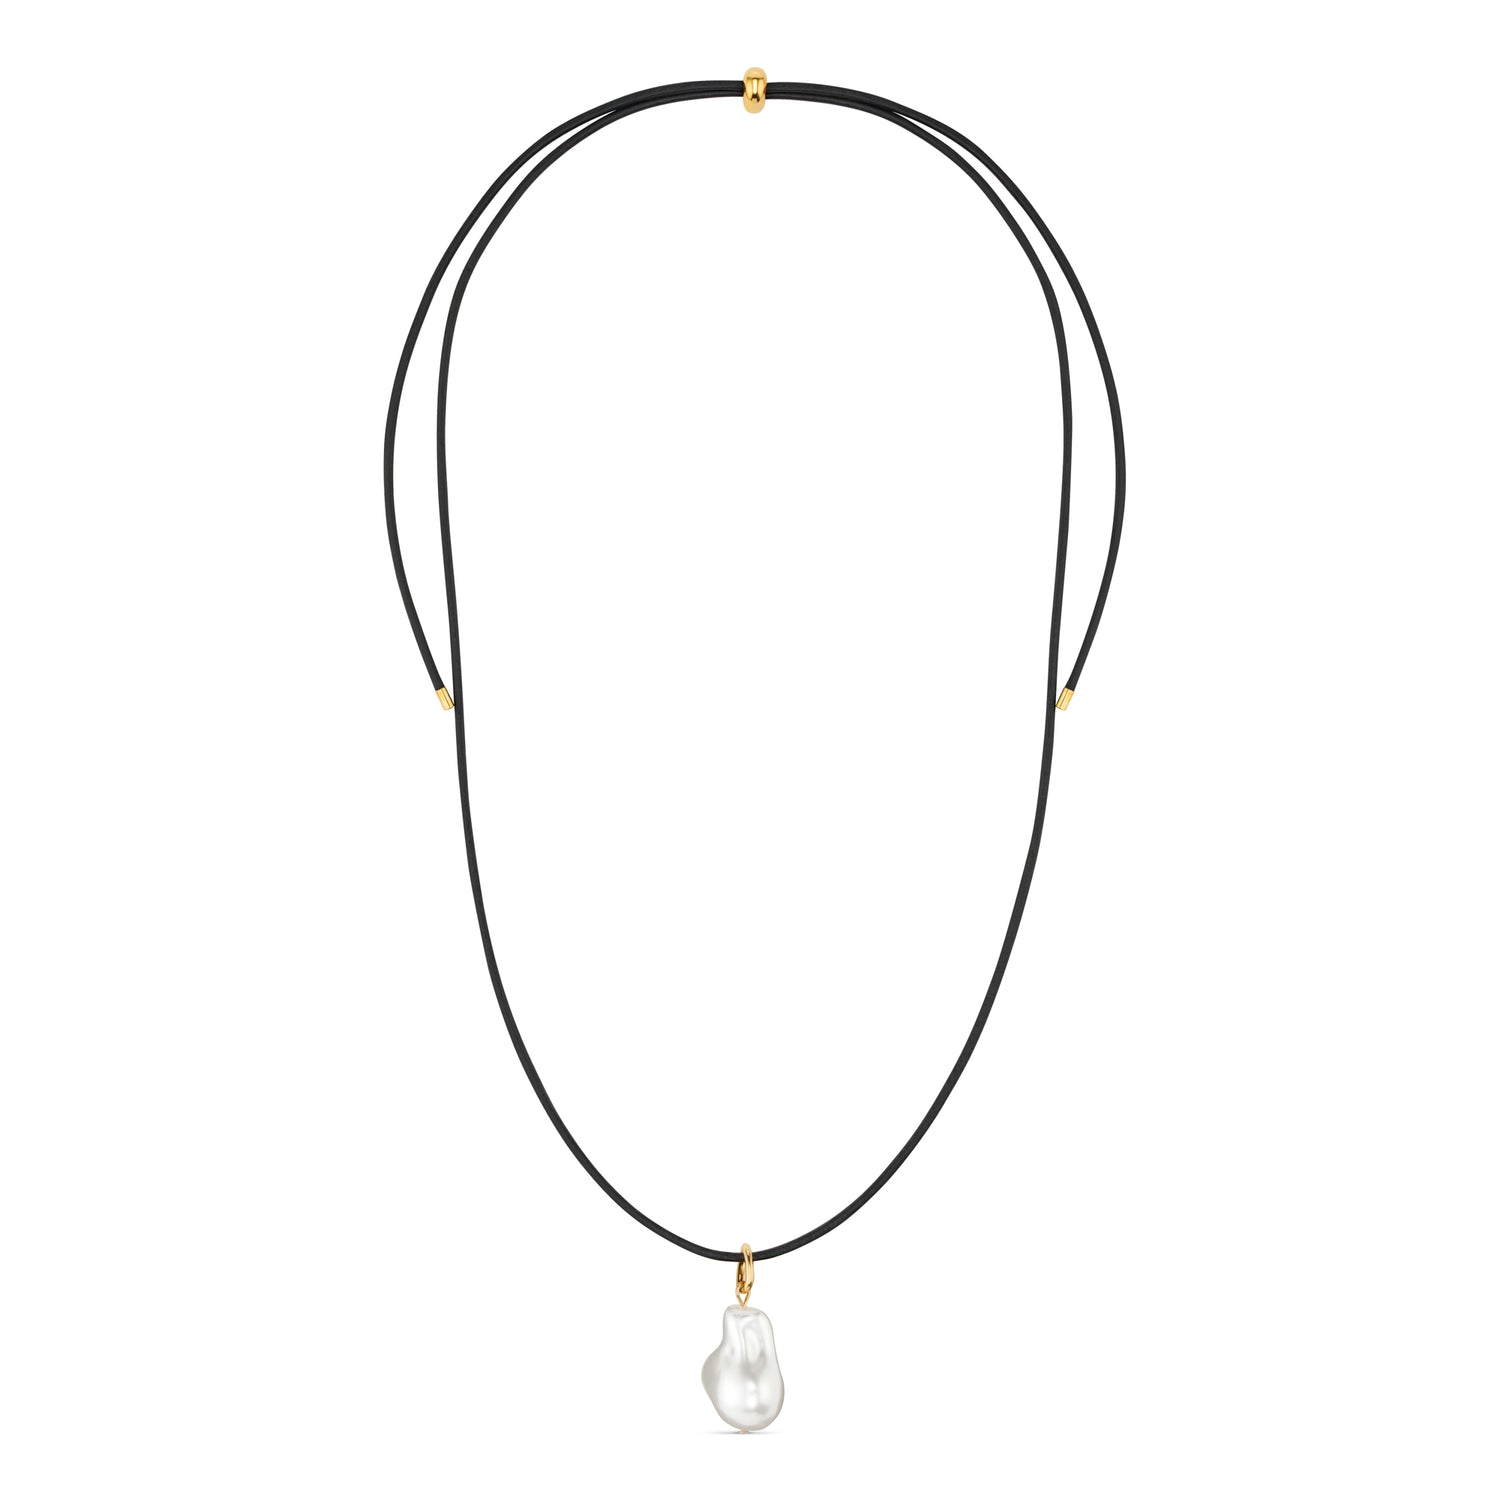 Elegant Single Layer Faux Pear Necklace With Adjustable Clavicle Chain And  Imitation Pearl Stones From Thundermout, $9.73 | DHgate.Com